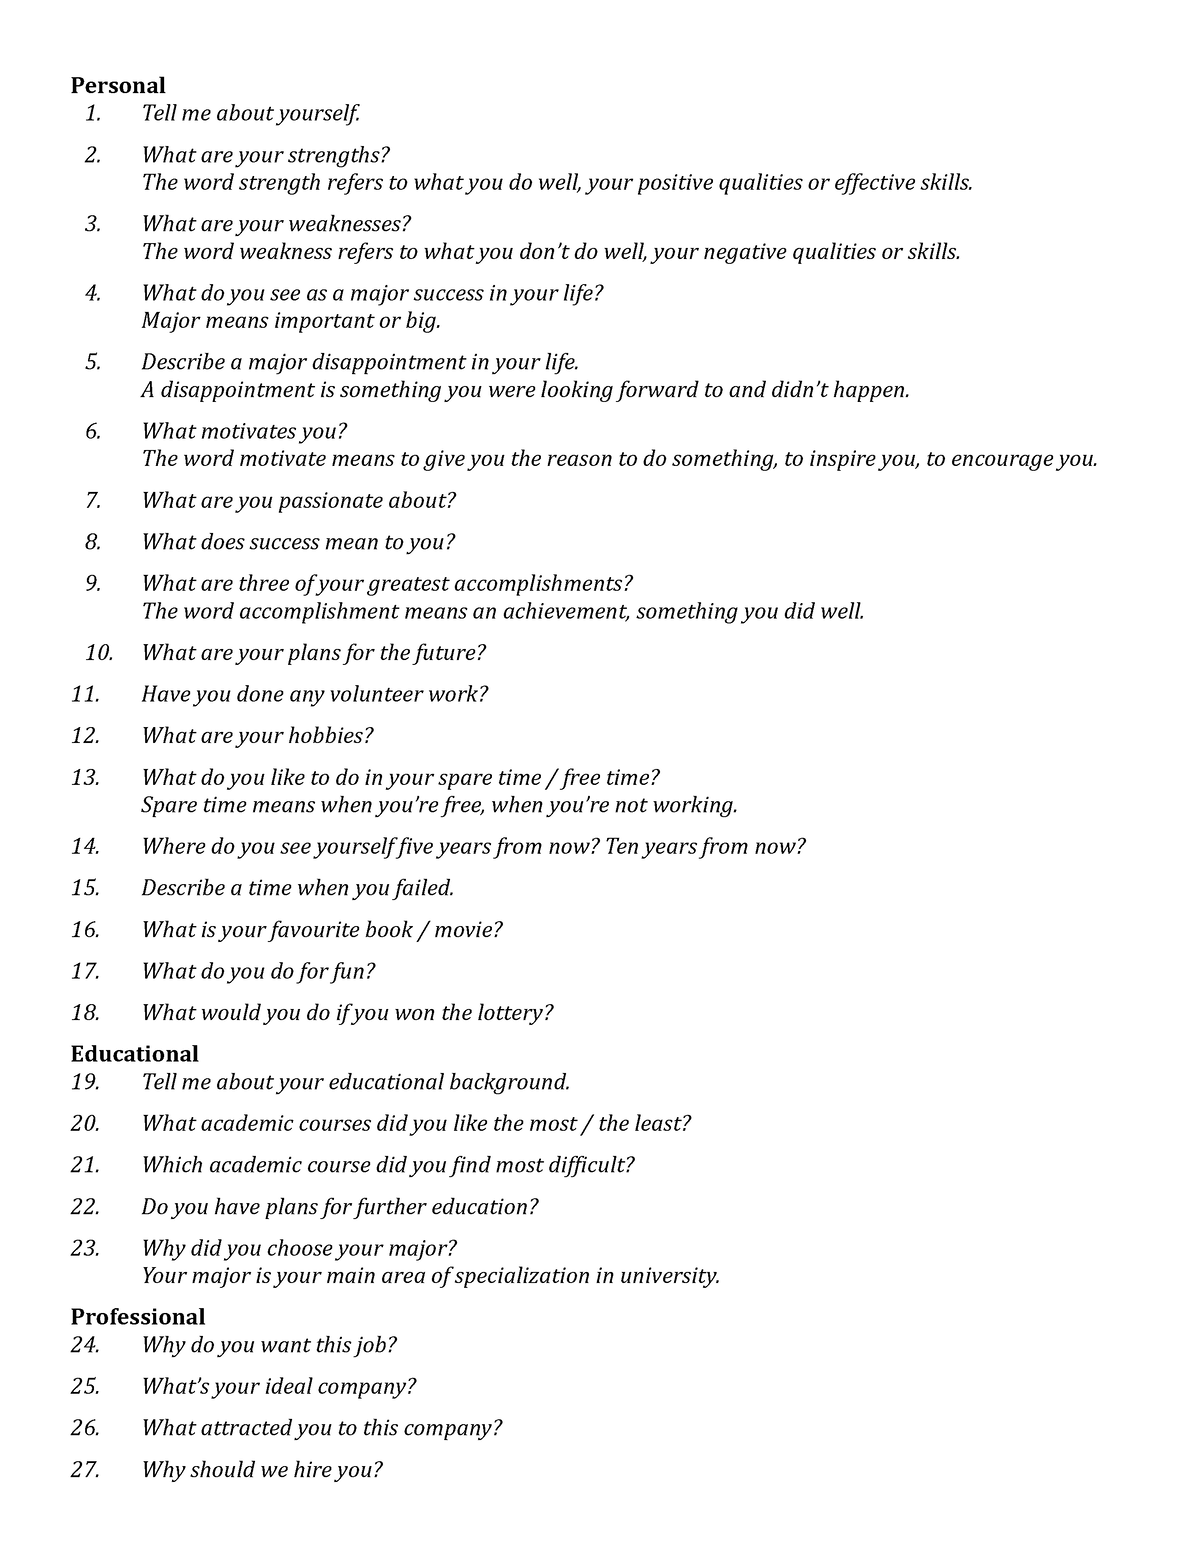 100 Common Job Interview Questions - Personal 1. Tell me about yourself ...